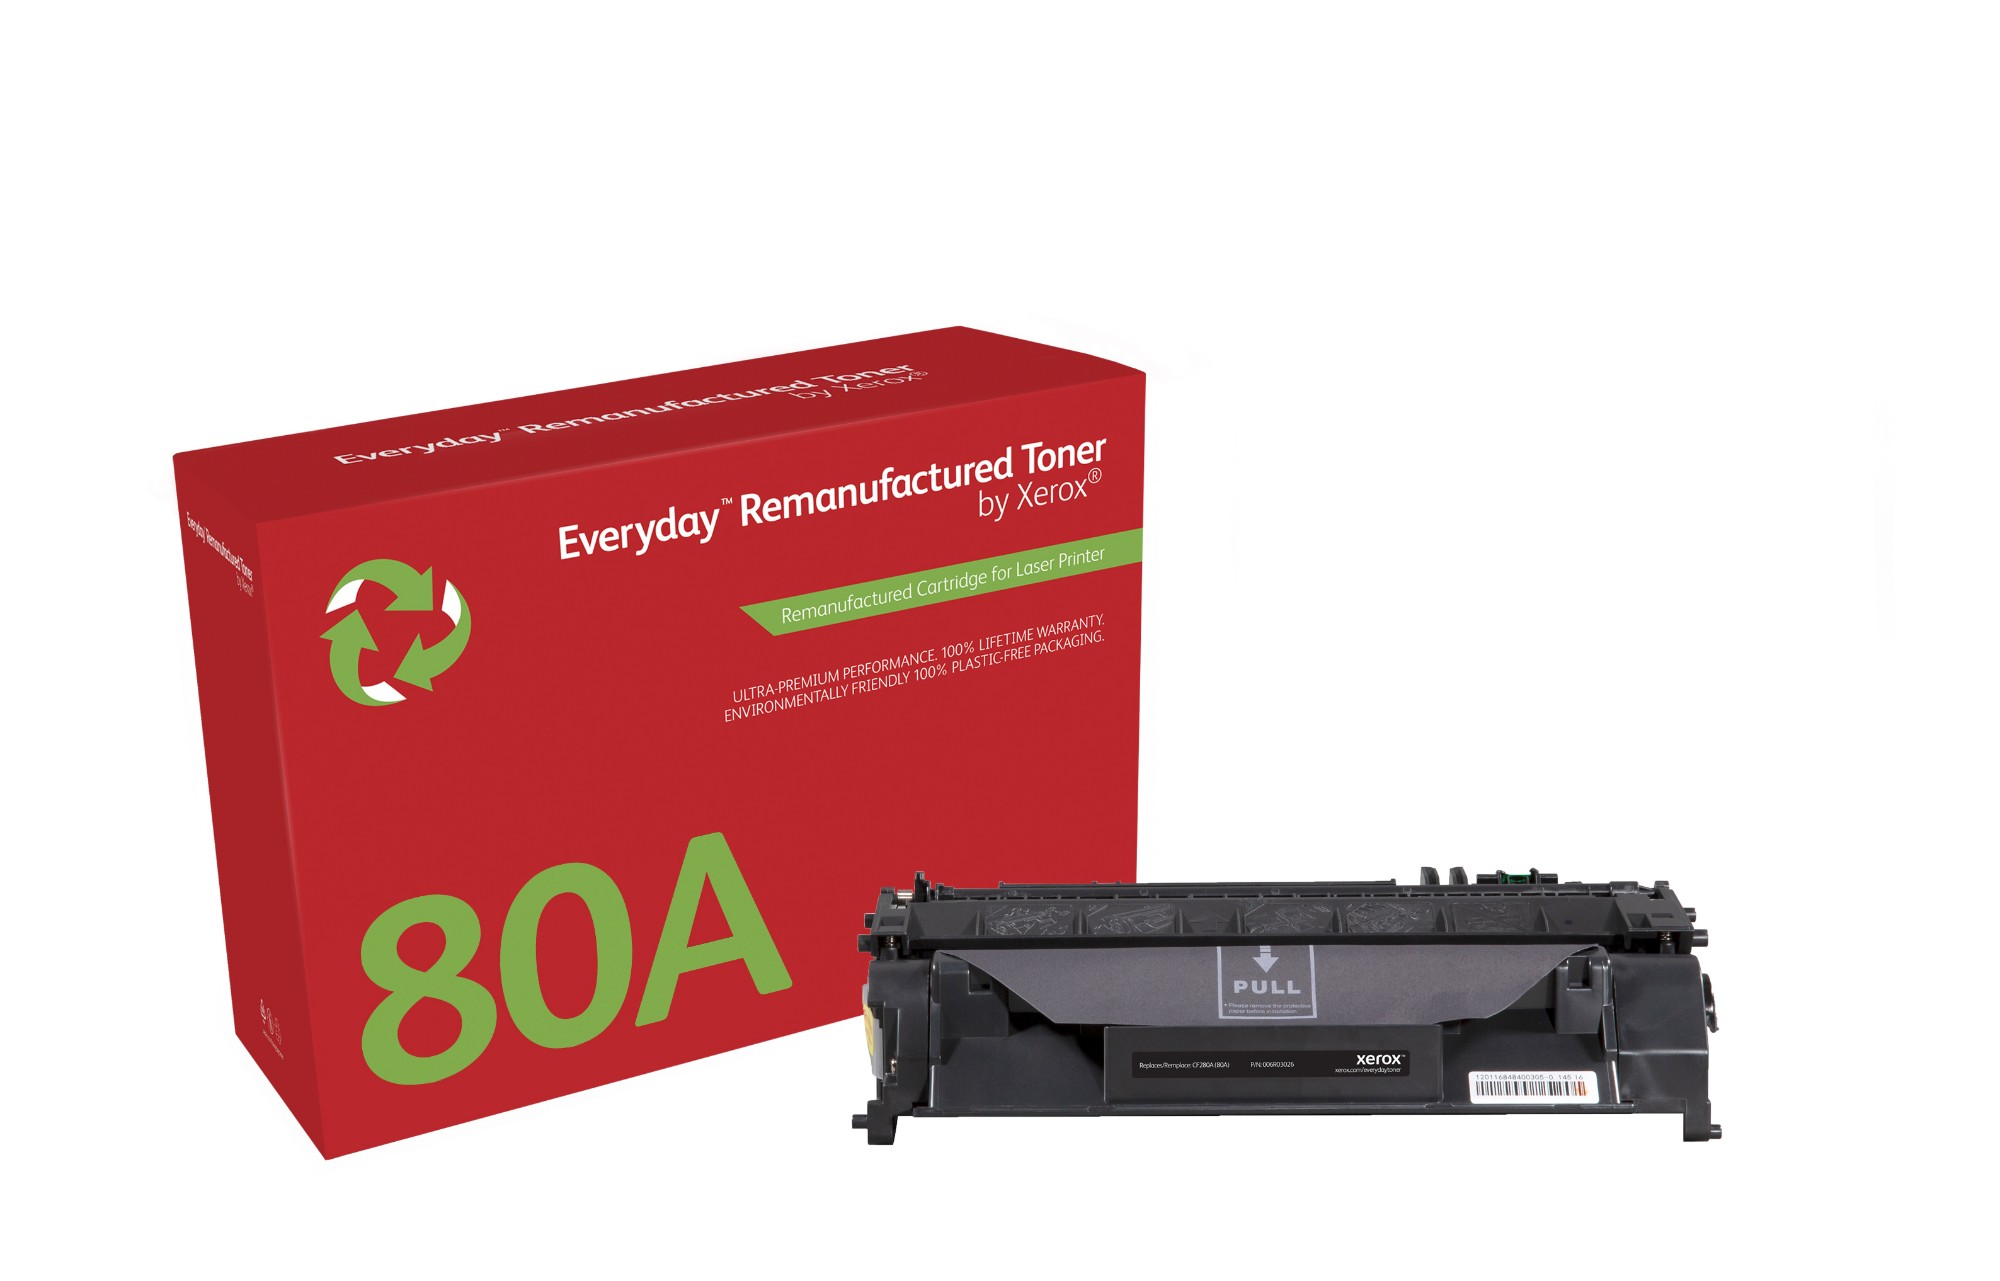 Xerox 006R03026 Toner cartridge black, 1x2.7K pages Pack=1 (replaces HP 80A/CF280A) for HP Pro 400